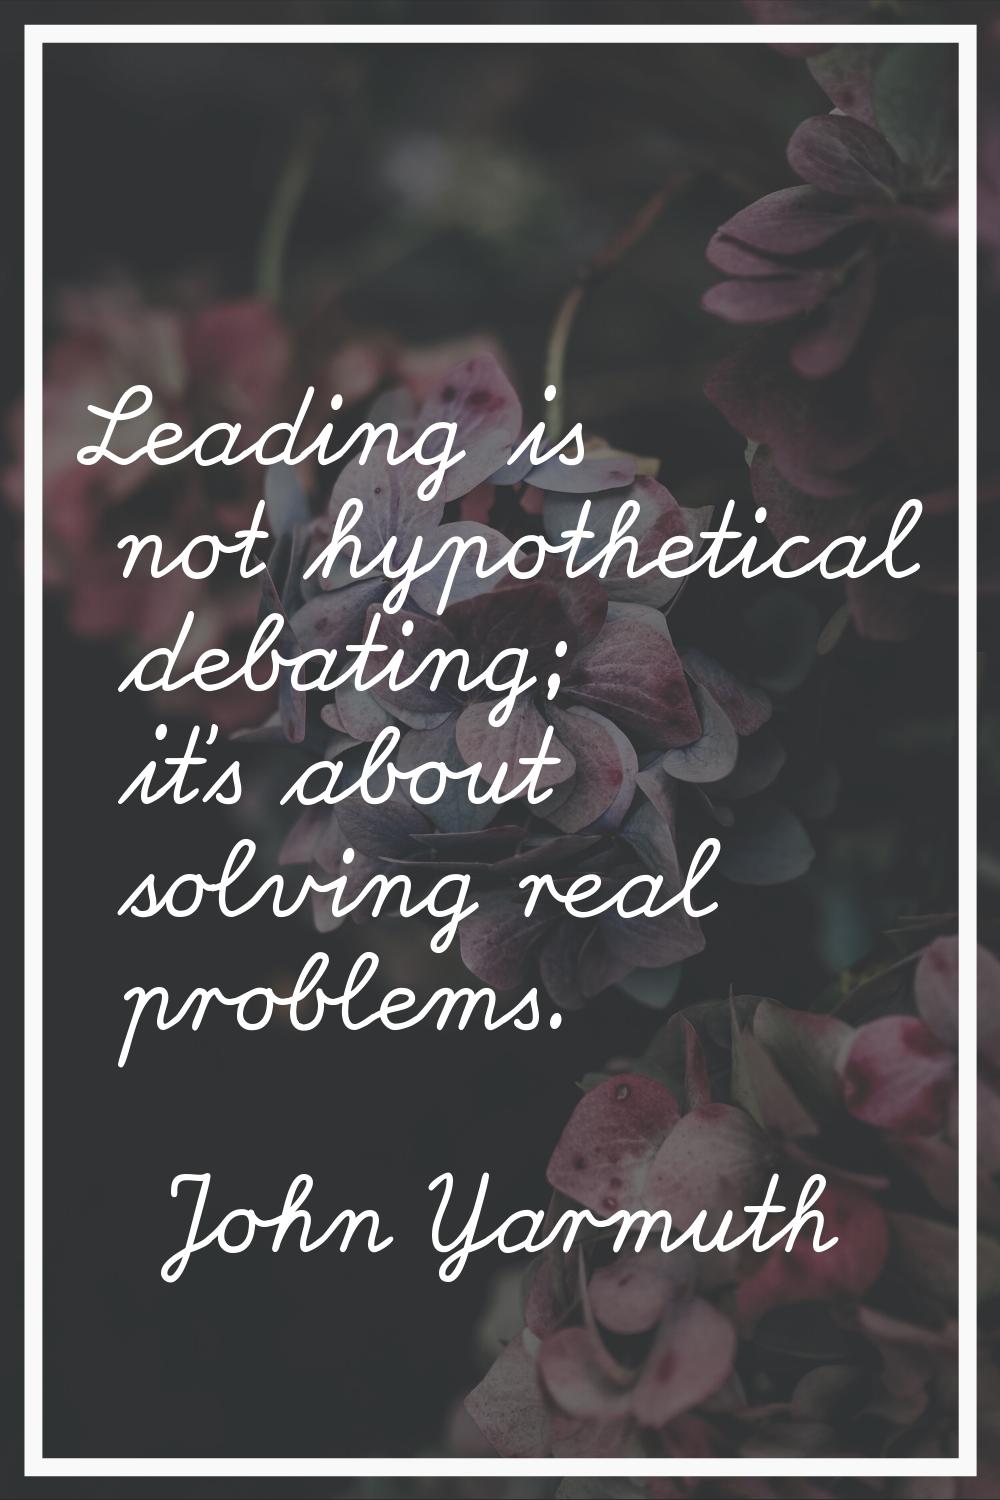 Leading is not hypothetical debating; it's about solving real problems.